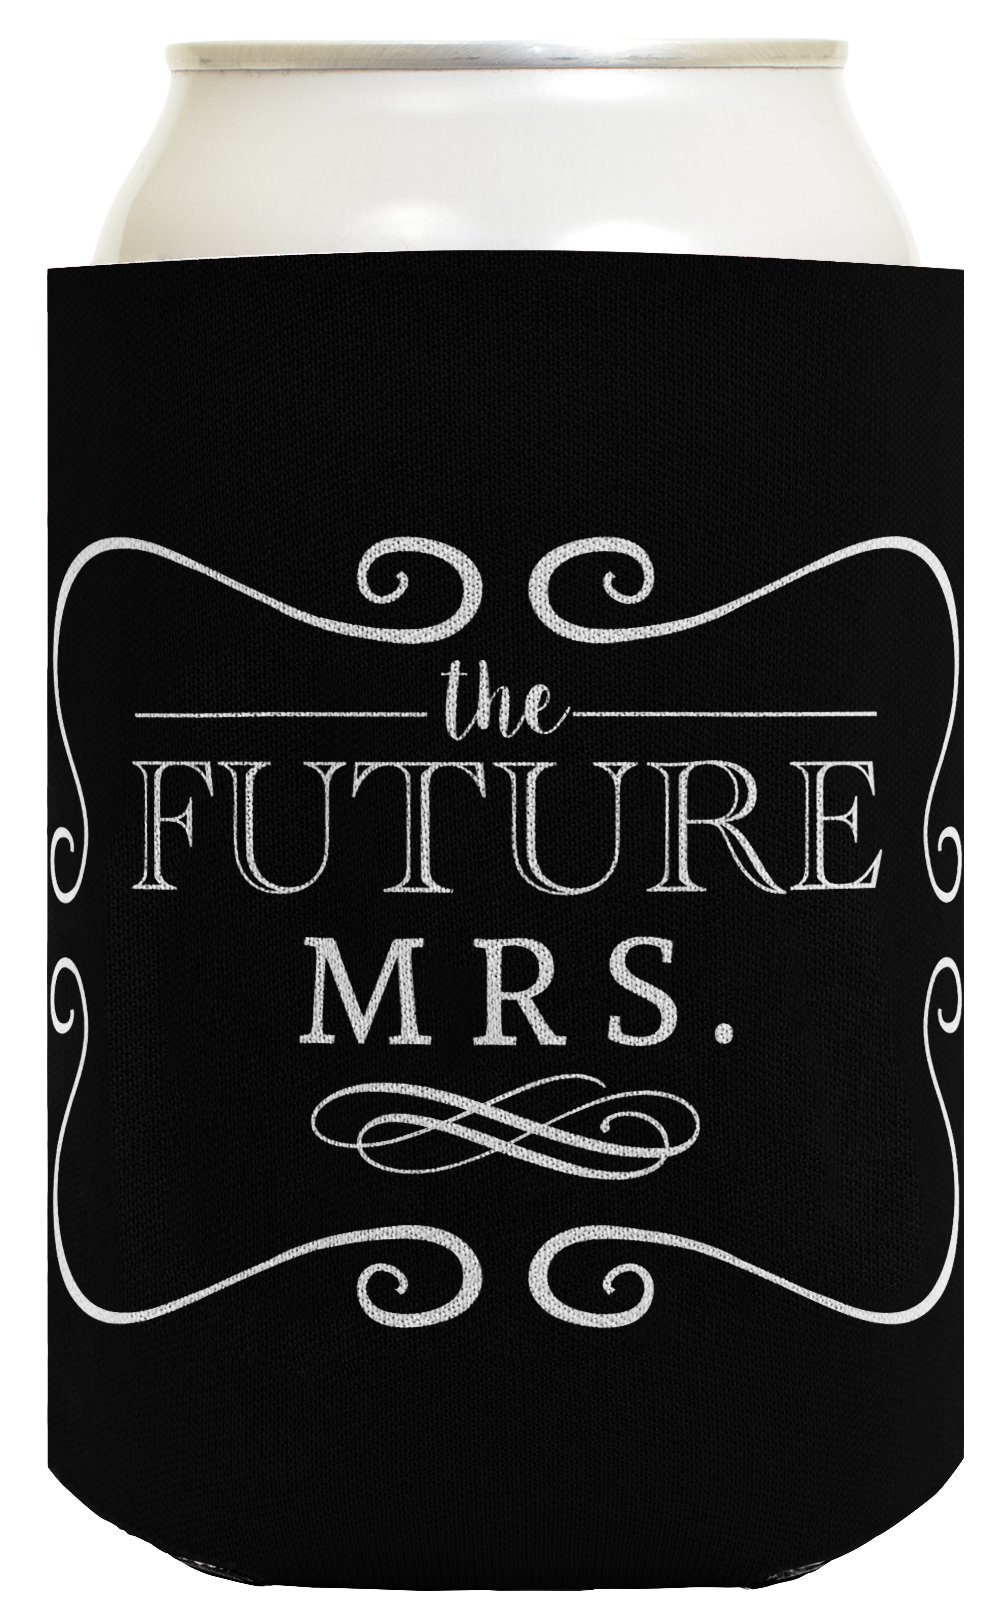 Bridal Shower Gifts Future Mr & Mrs Wedding Gift 2 Pack Can Coolie Drink Coolers Coolies Black